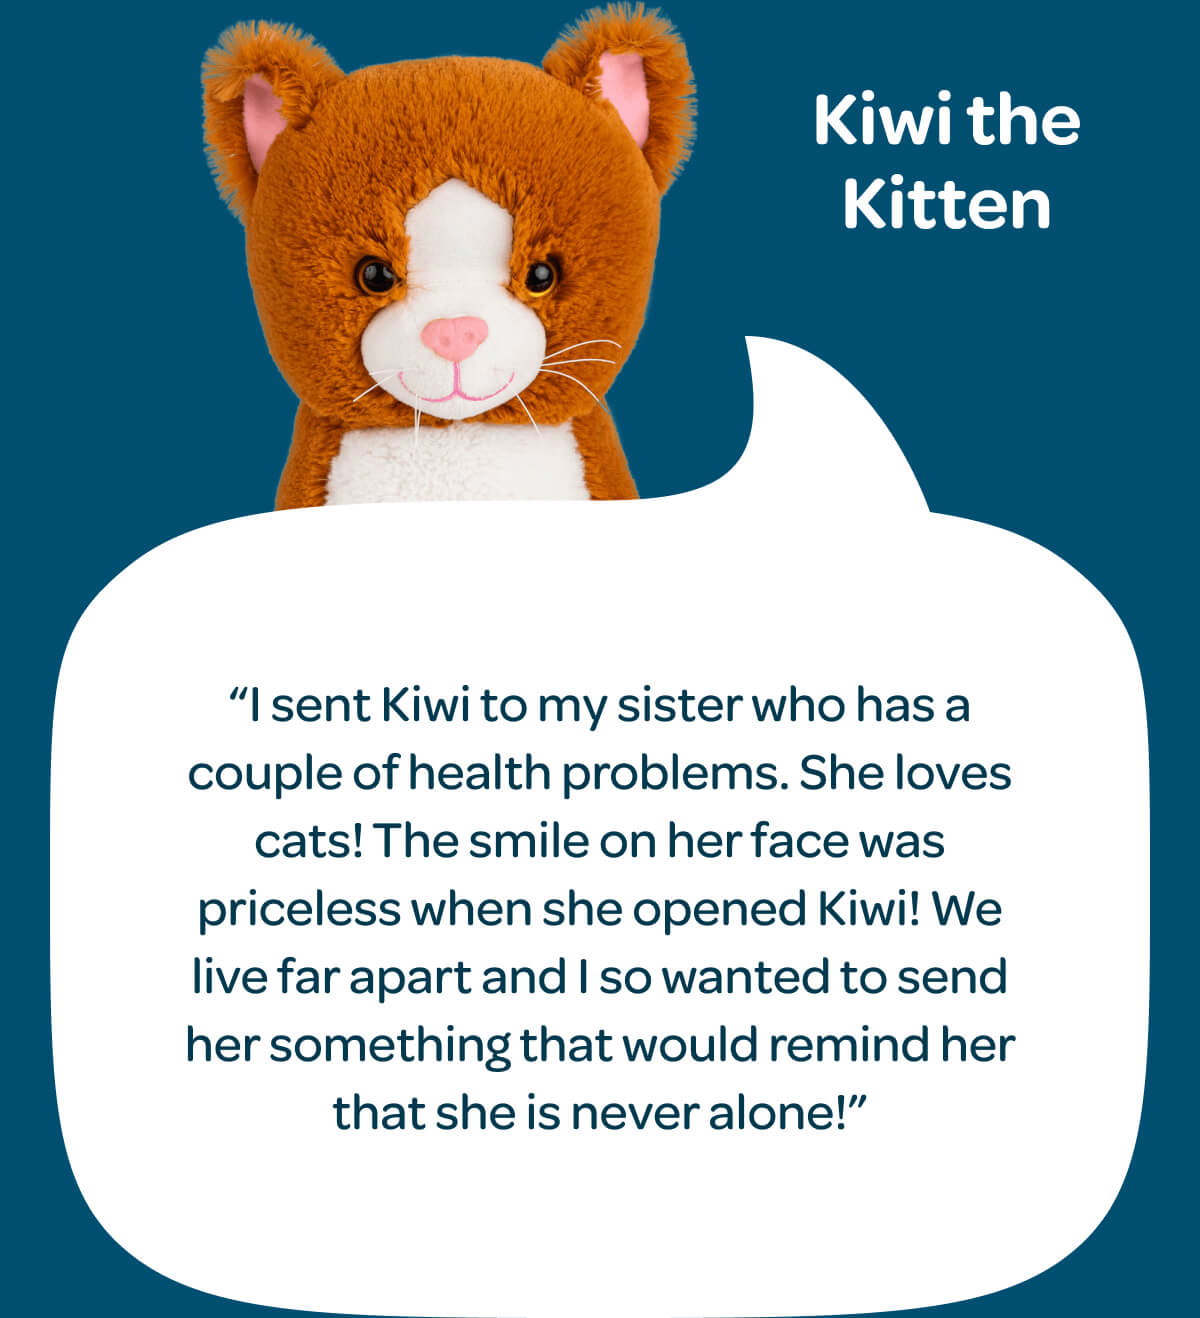 Kiwi the Kitten. “I sent Kiwi to my sister who has a couple of health problems. She loves cats! The smile on her face was priceless when she opened Kiwi! We live far apart and I so wanted to send her something that would remind her that she is never alone!”